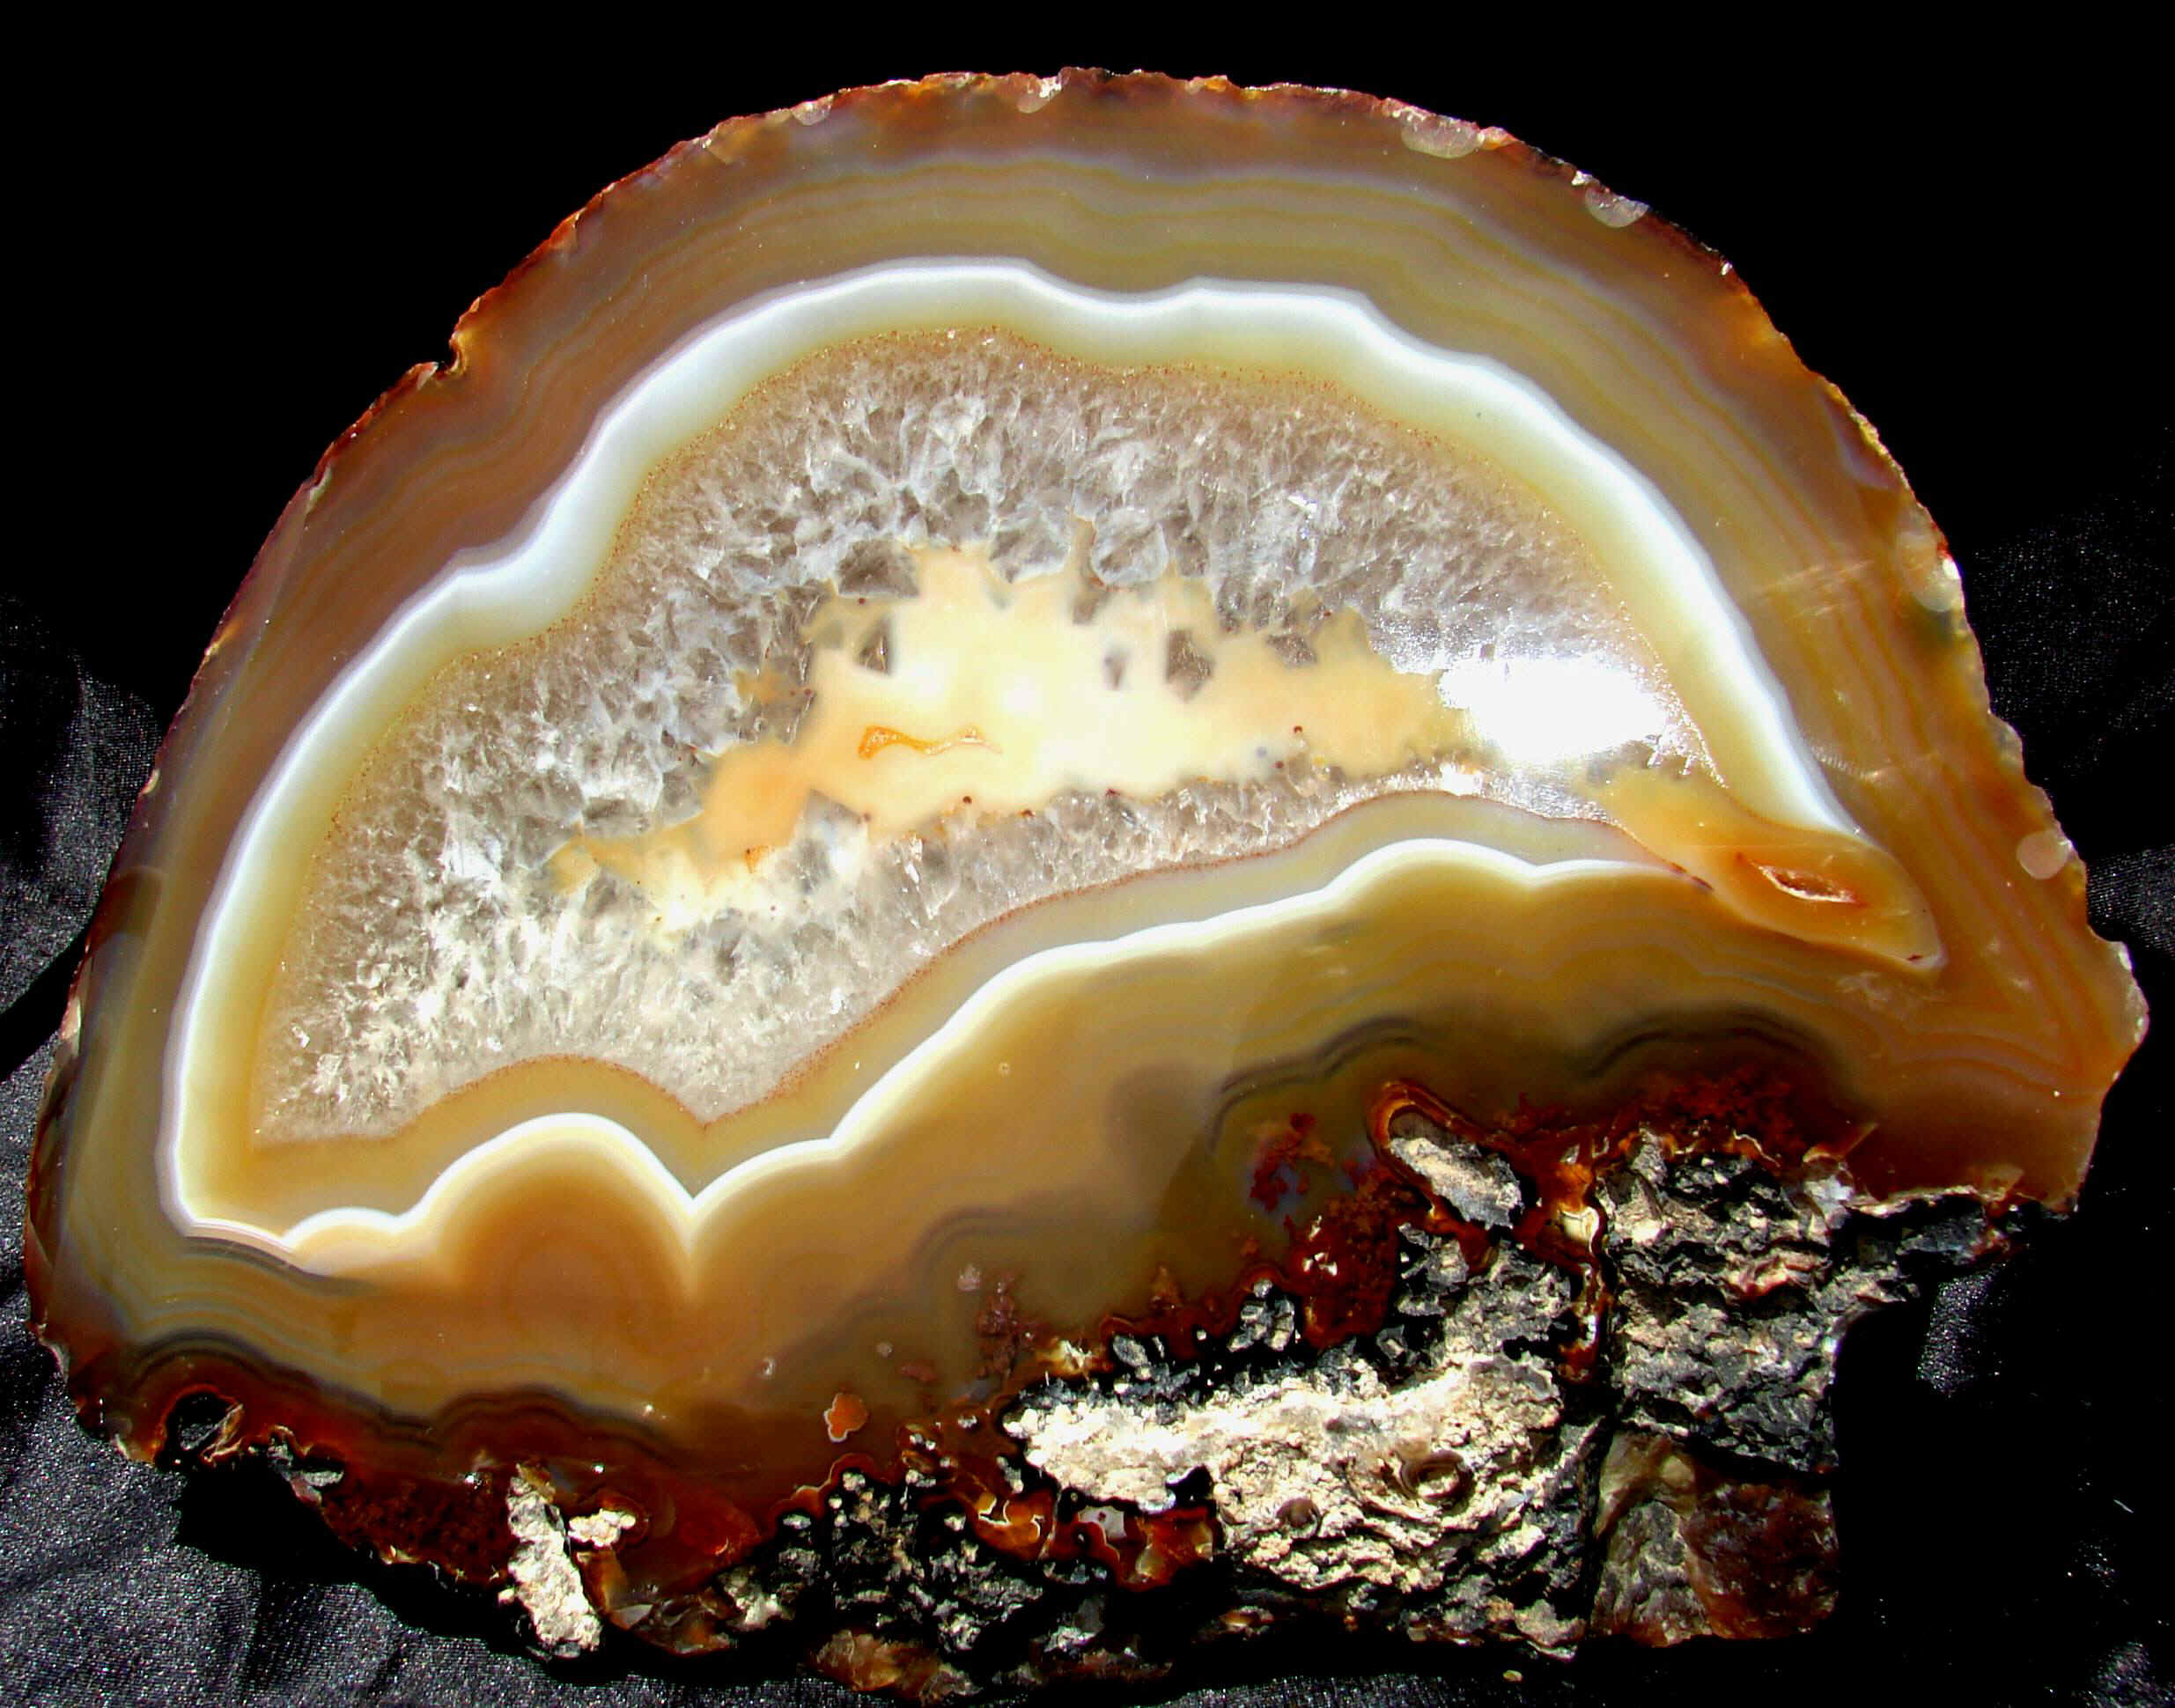 Welcome to our giant agate specimen page!